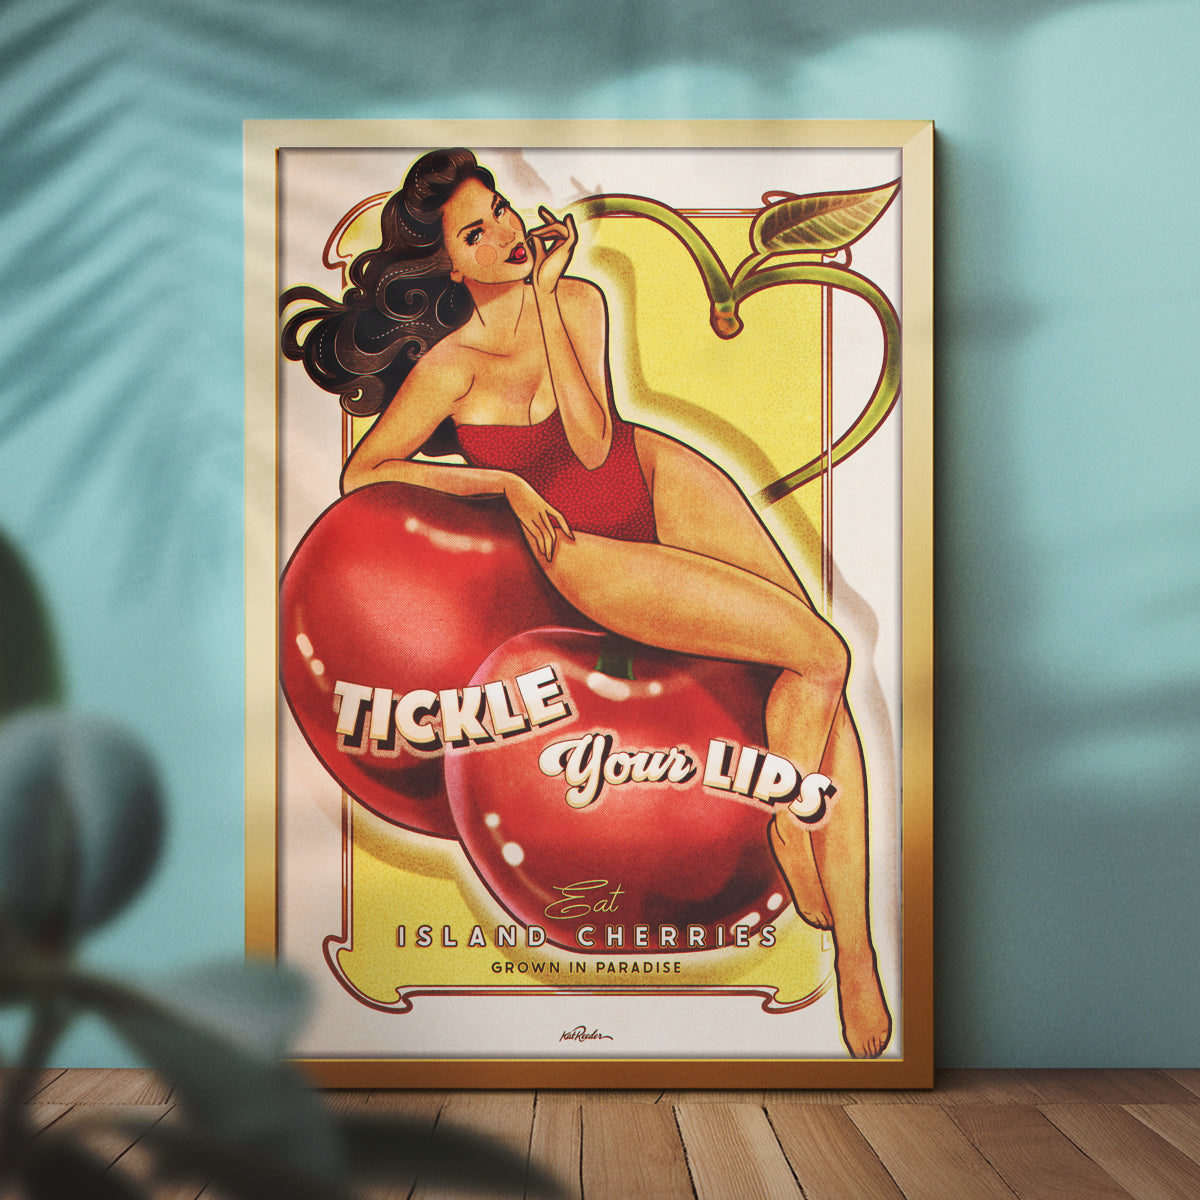 a framed poster featuring a vintage pin up art of a dark haired woman in a red bathing suit eating a cherry seductively. She is perched on giant cherries. The text reads "Tickle your Lips with Island Cherries"